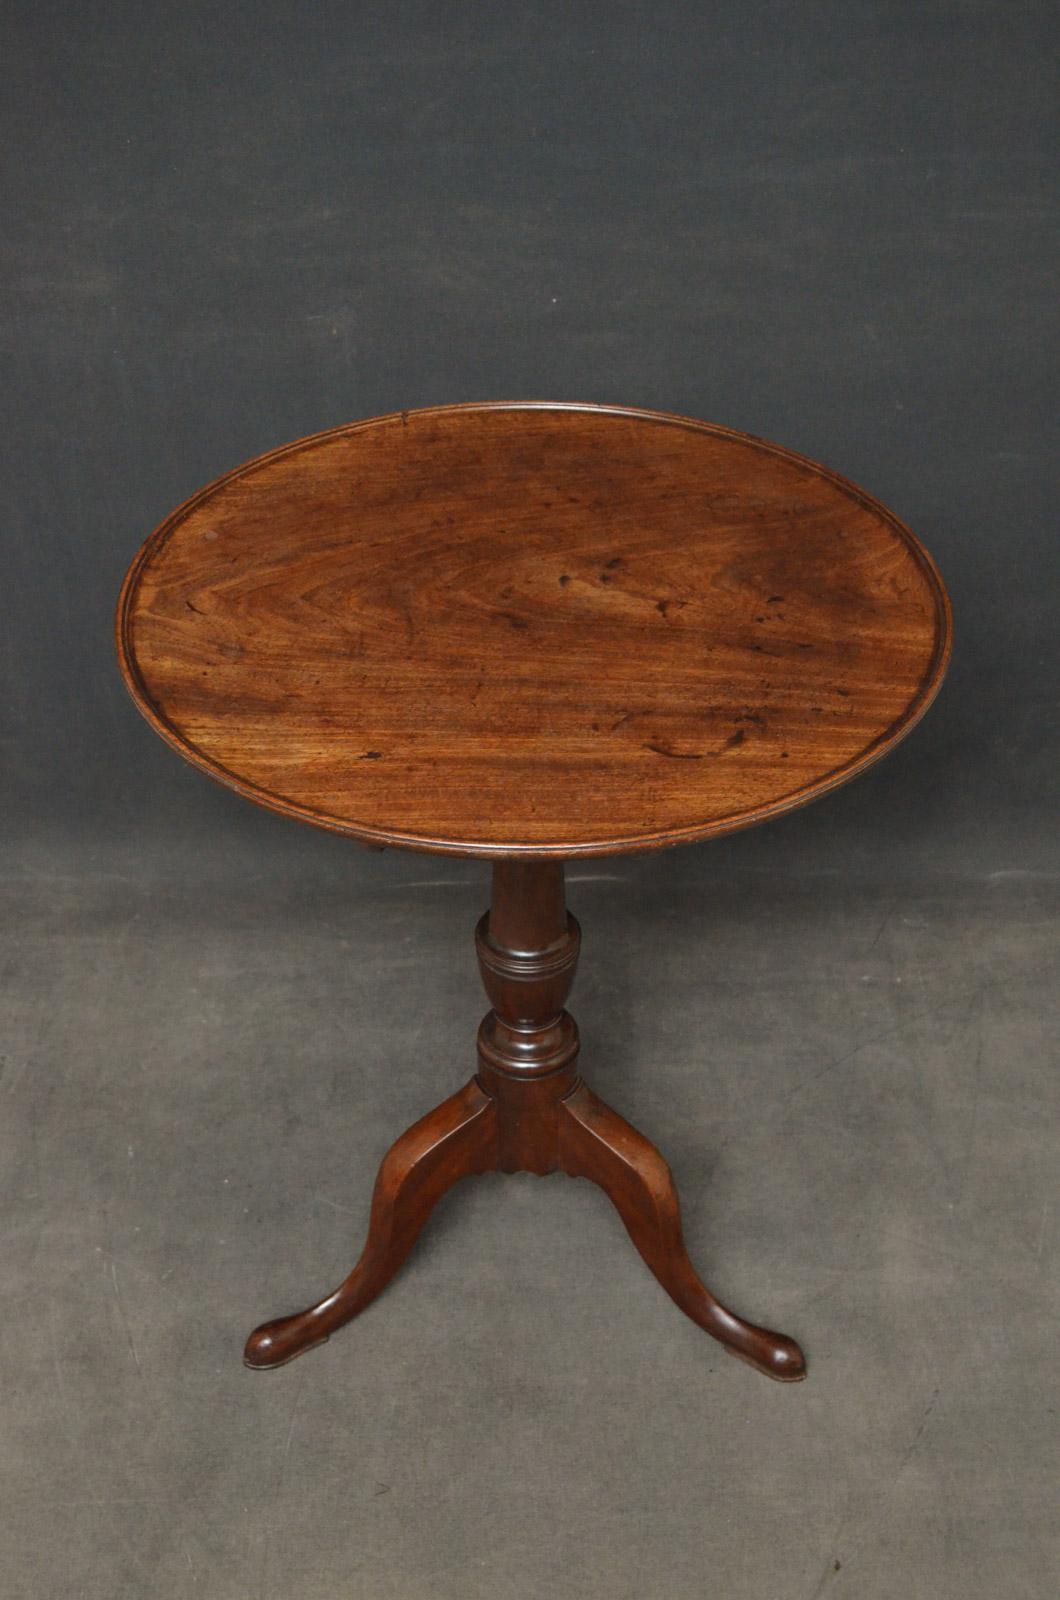 Sn4575 fine Georgian tripod table, having one piece dished top in figured mahogany on turned urn column terminating in 3 cabriole legs and pad feet. This antique table retains its original finish, soft colour and patina, all in wonderful home ready